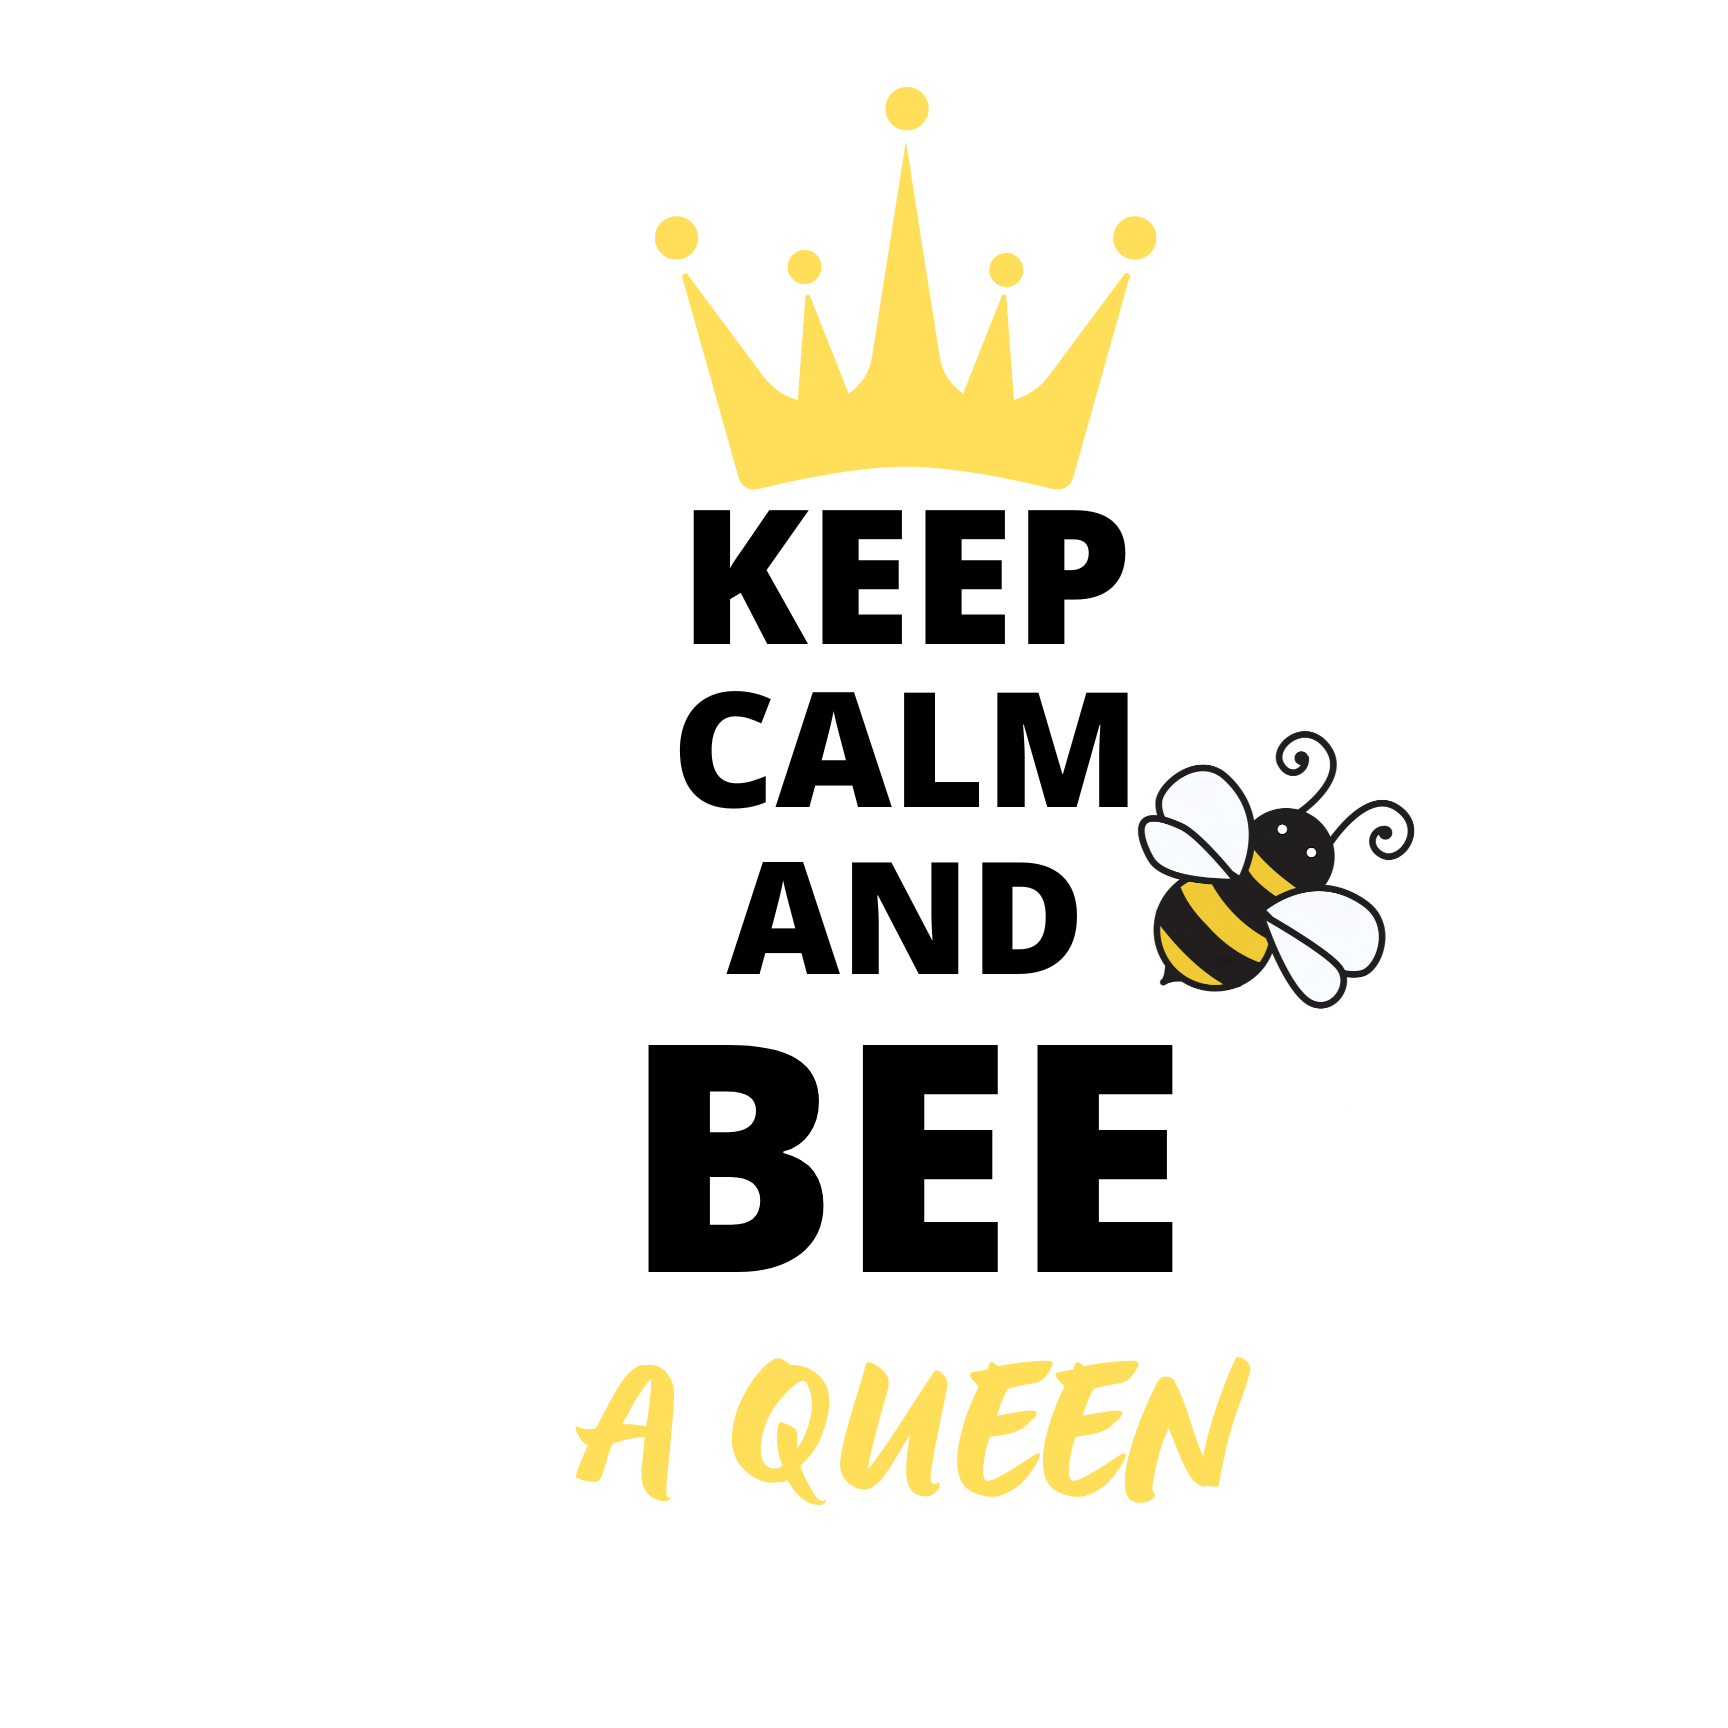 Keep Calm and Bee a Queen - That Bee Place